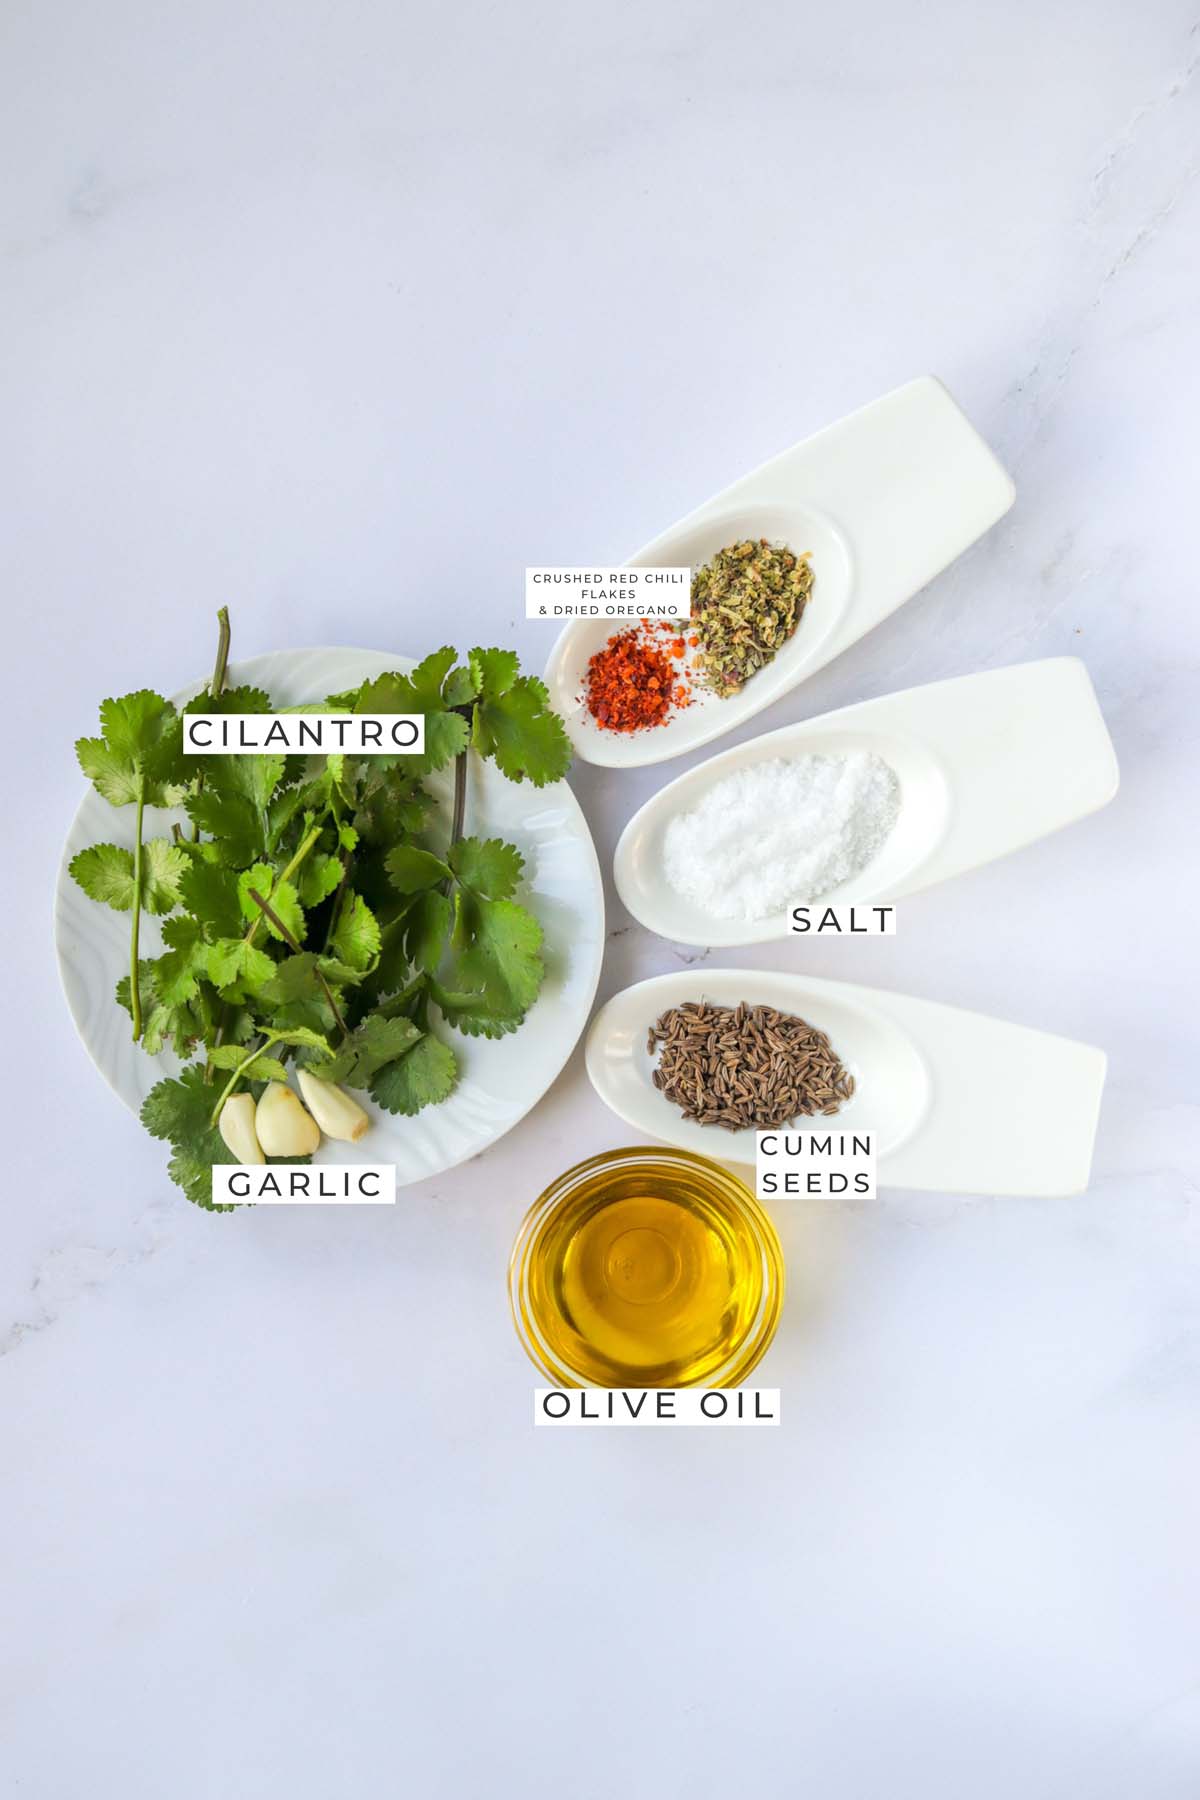 Labeled ingredients for the sauce.